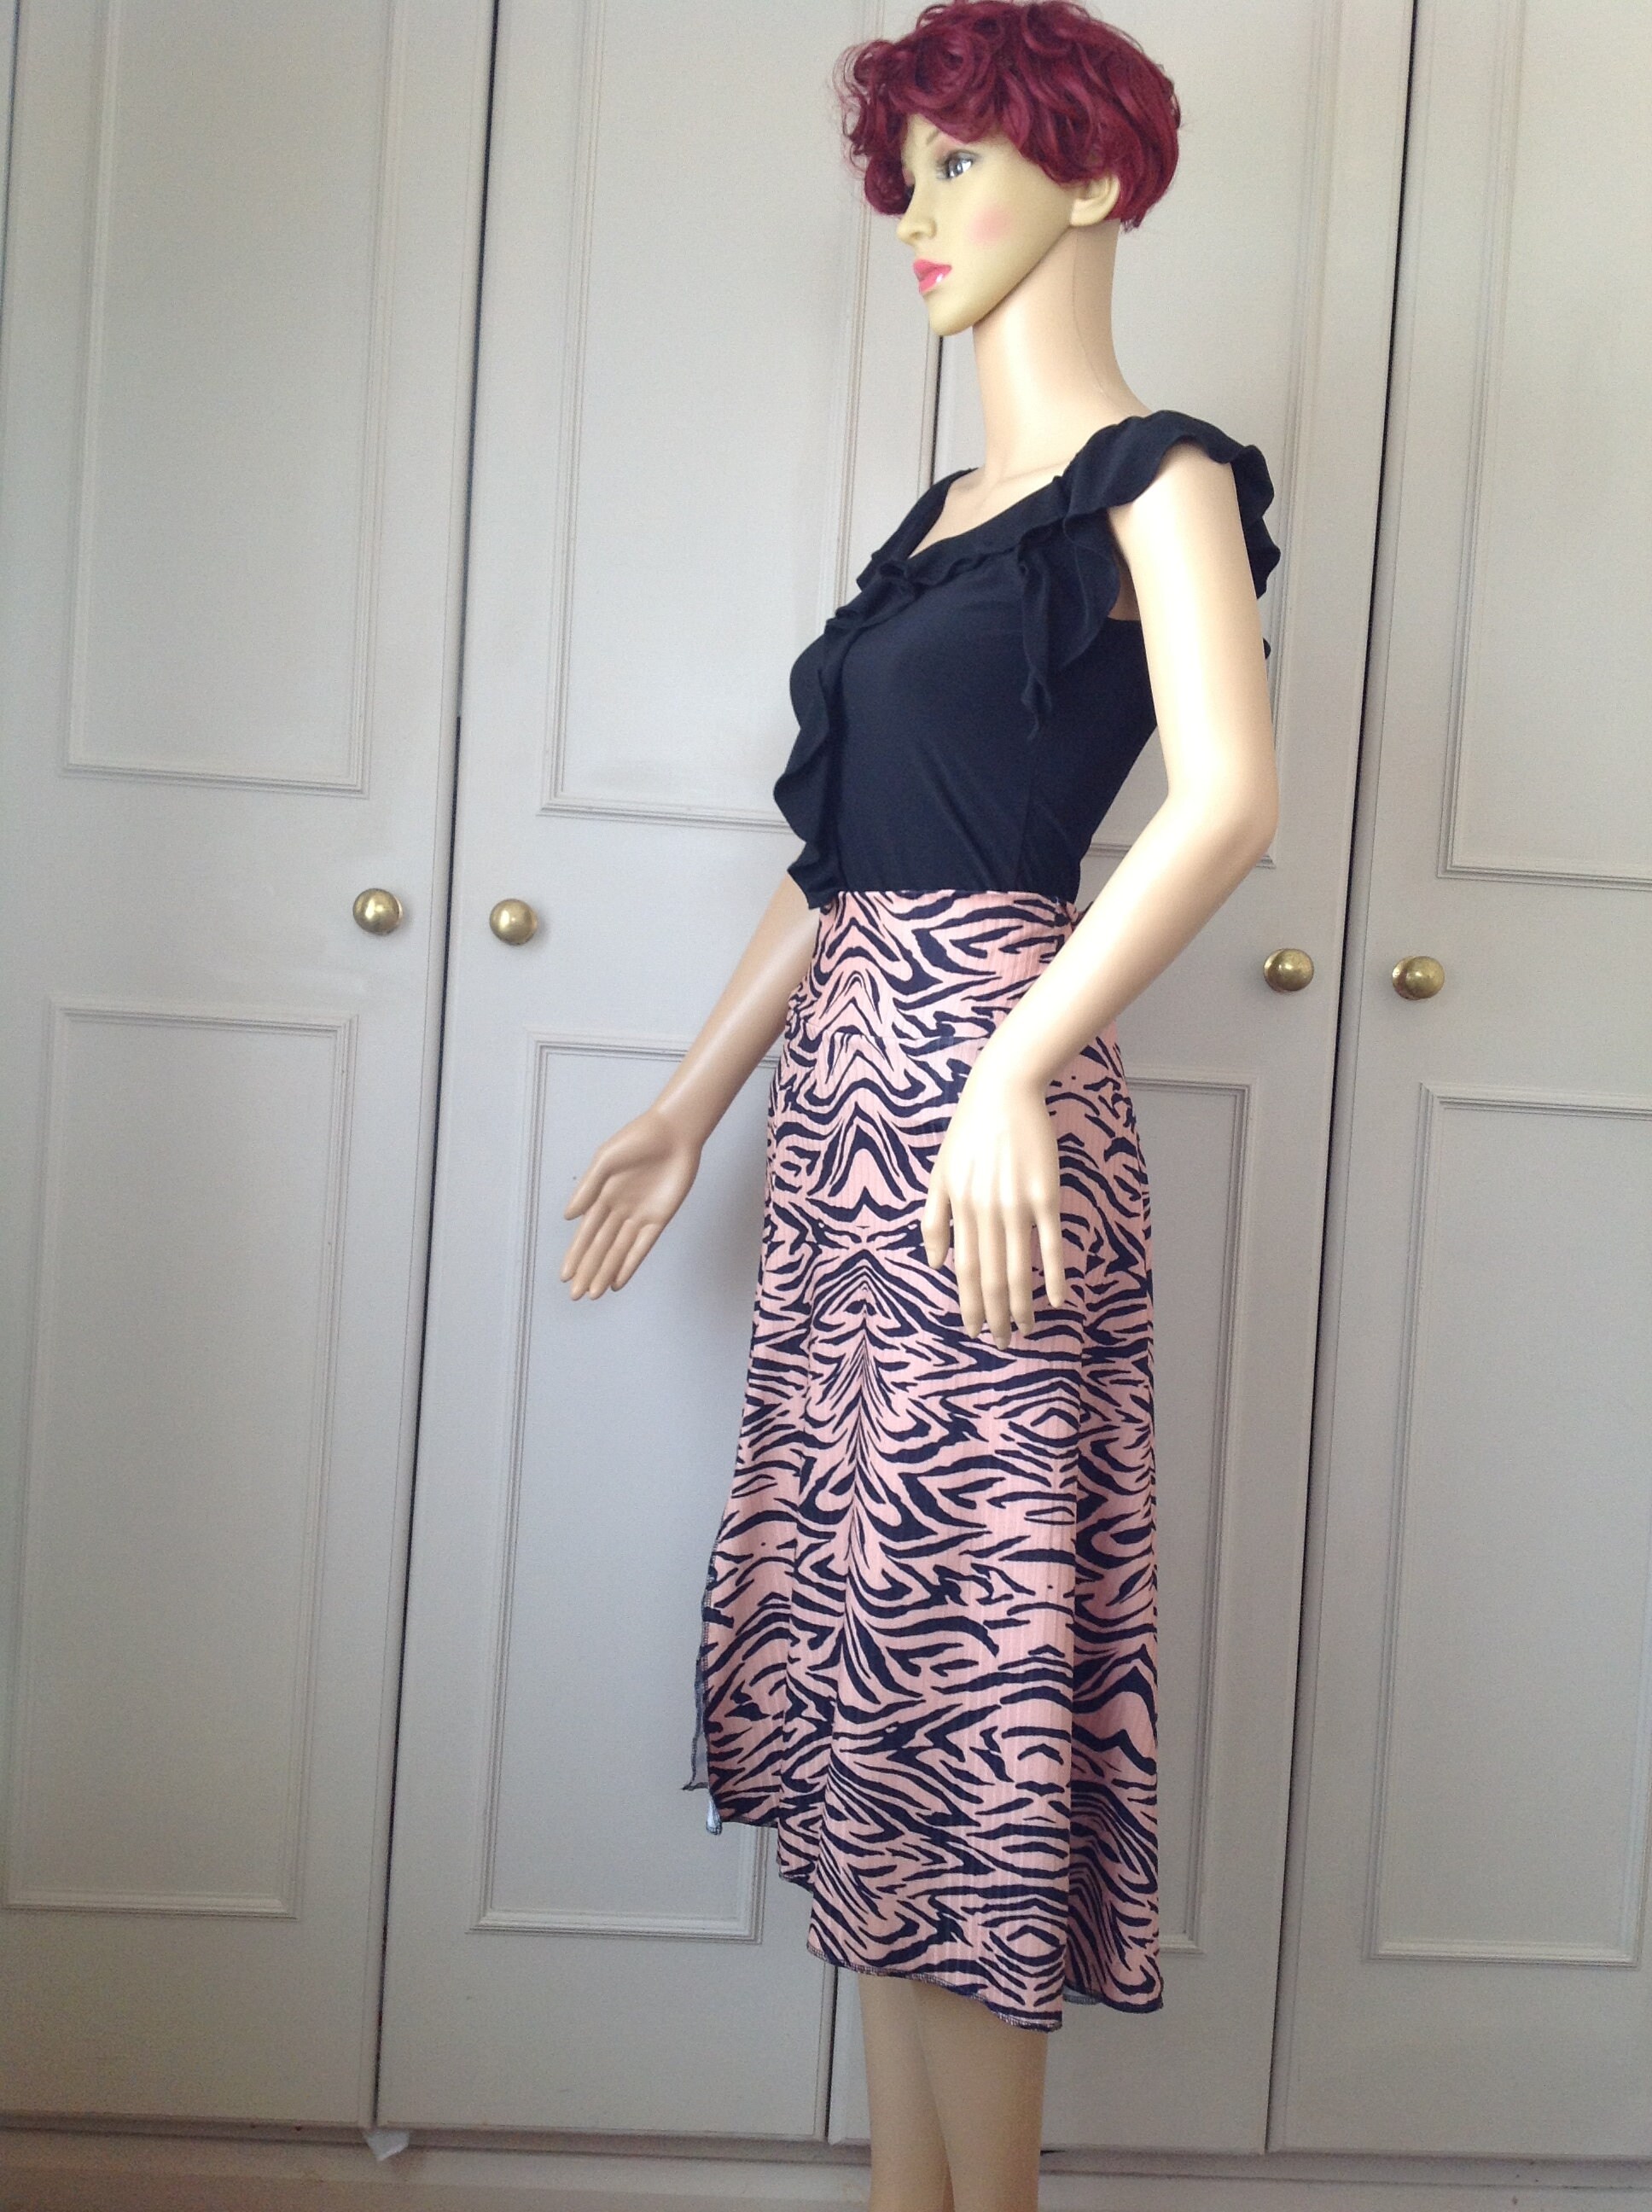 Tango Skirt in Small to Medium Size - Etsy